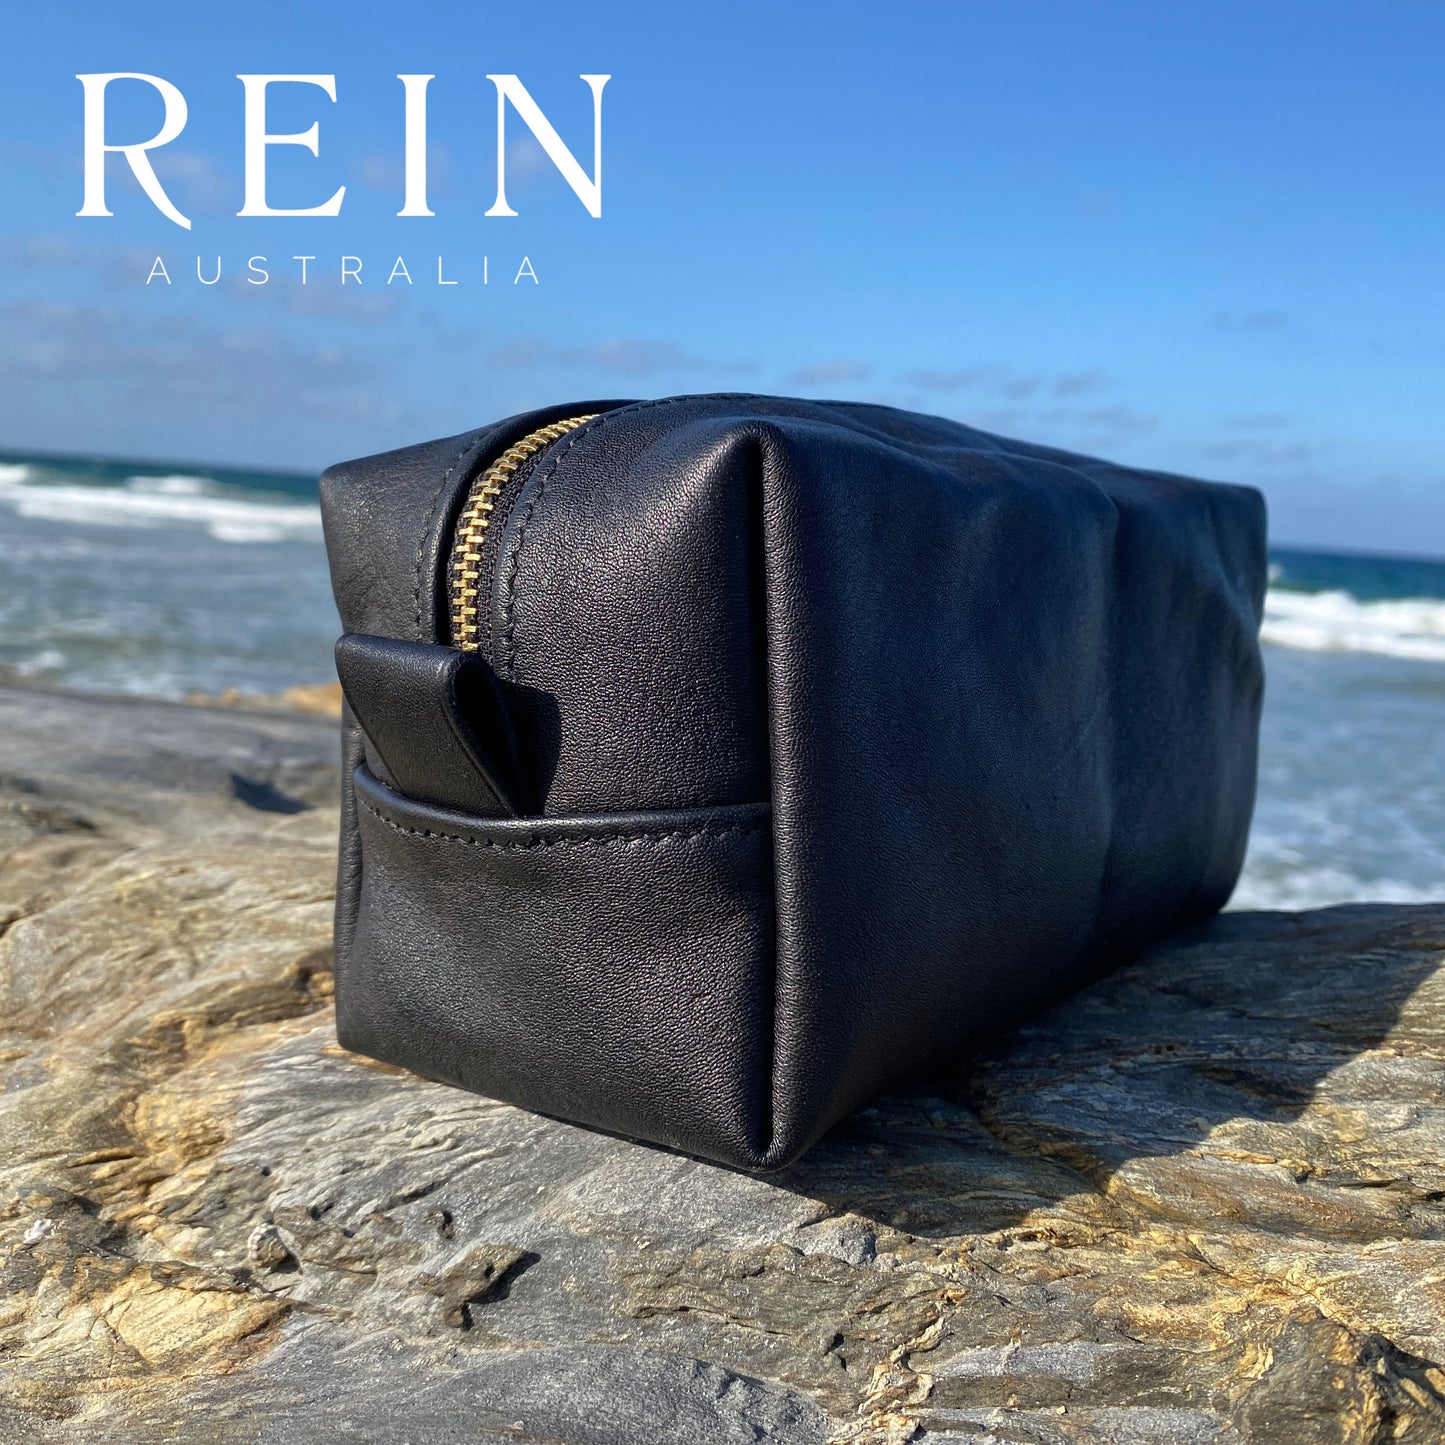 Upcycled Leather Toiletry Bag - Black